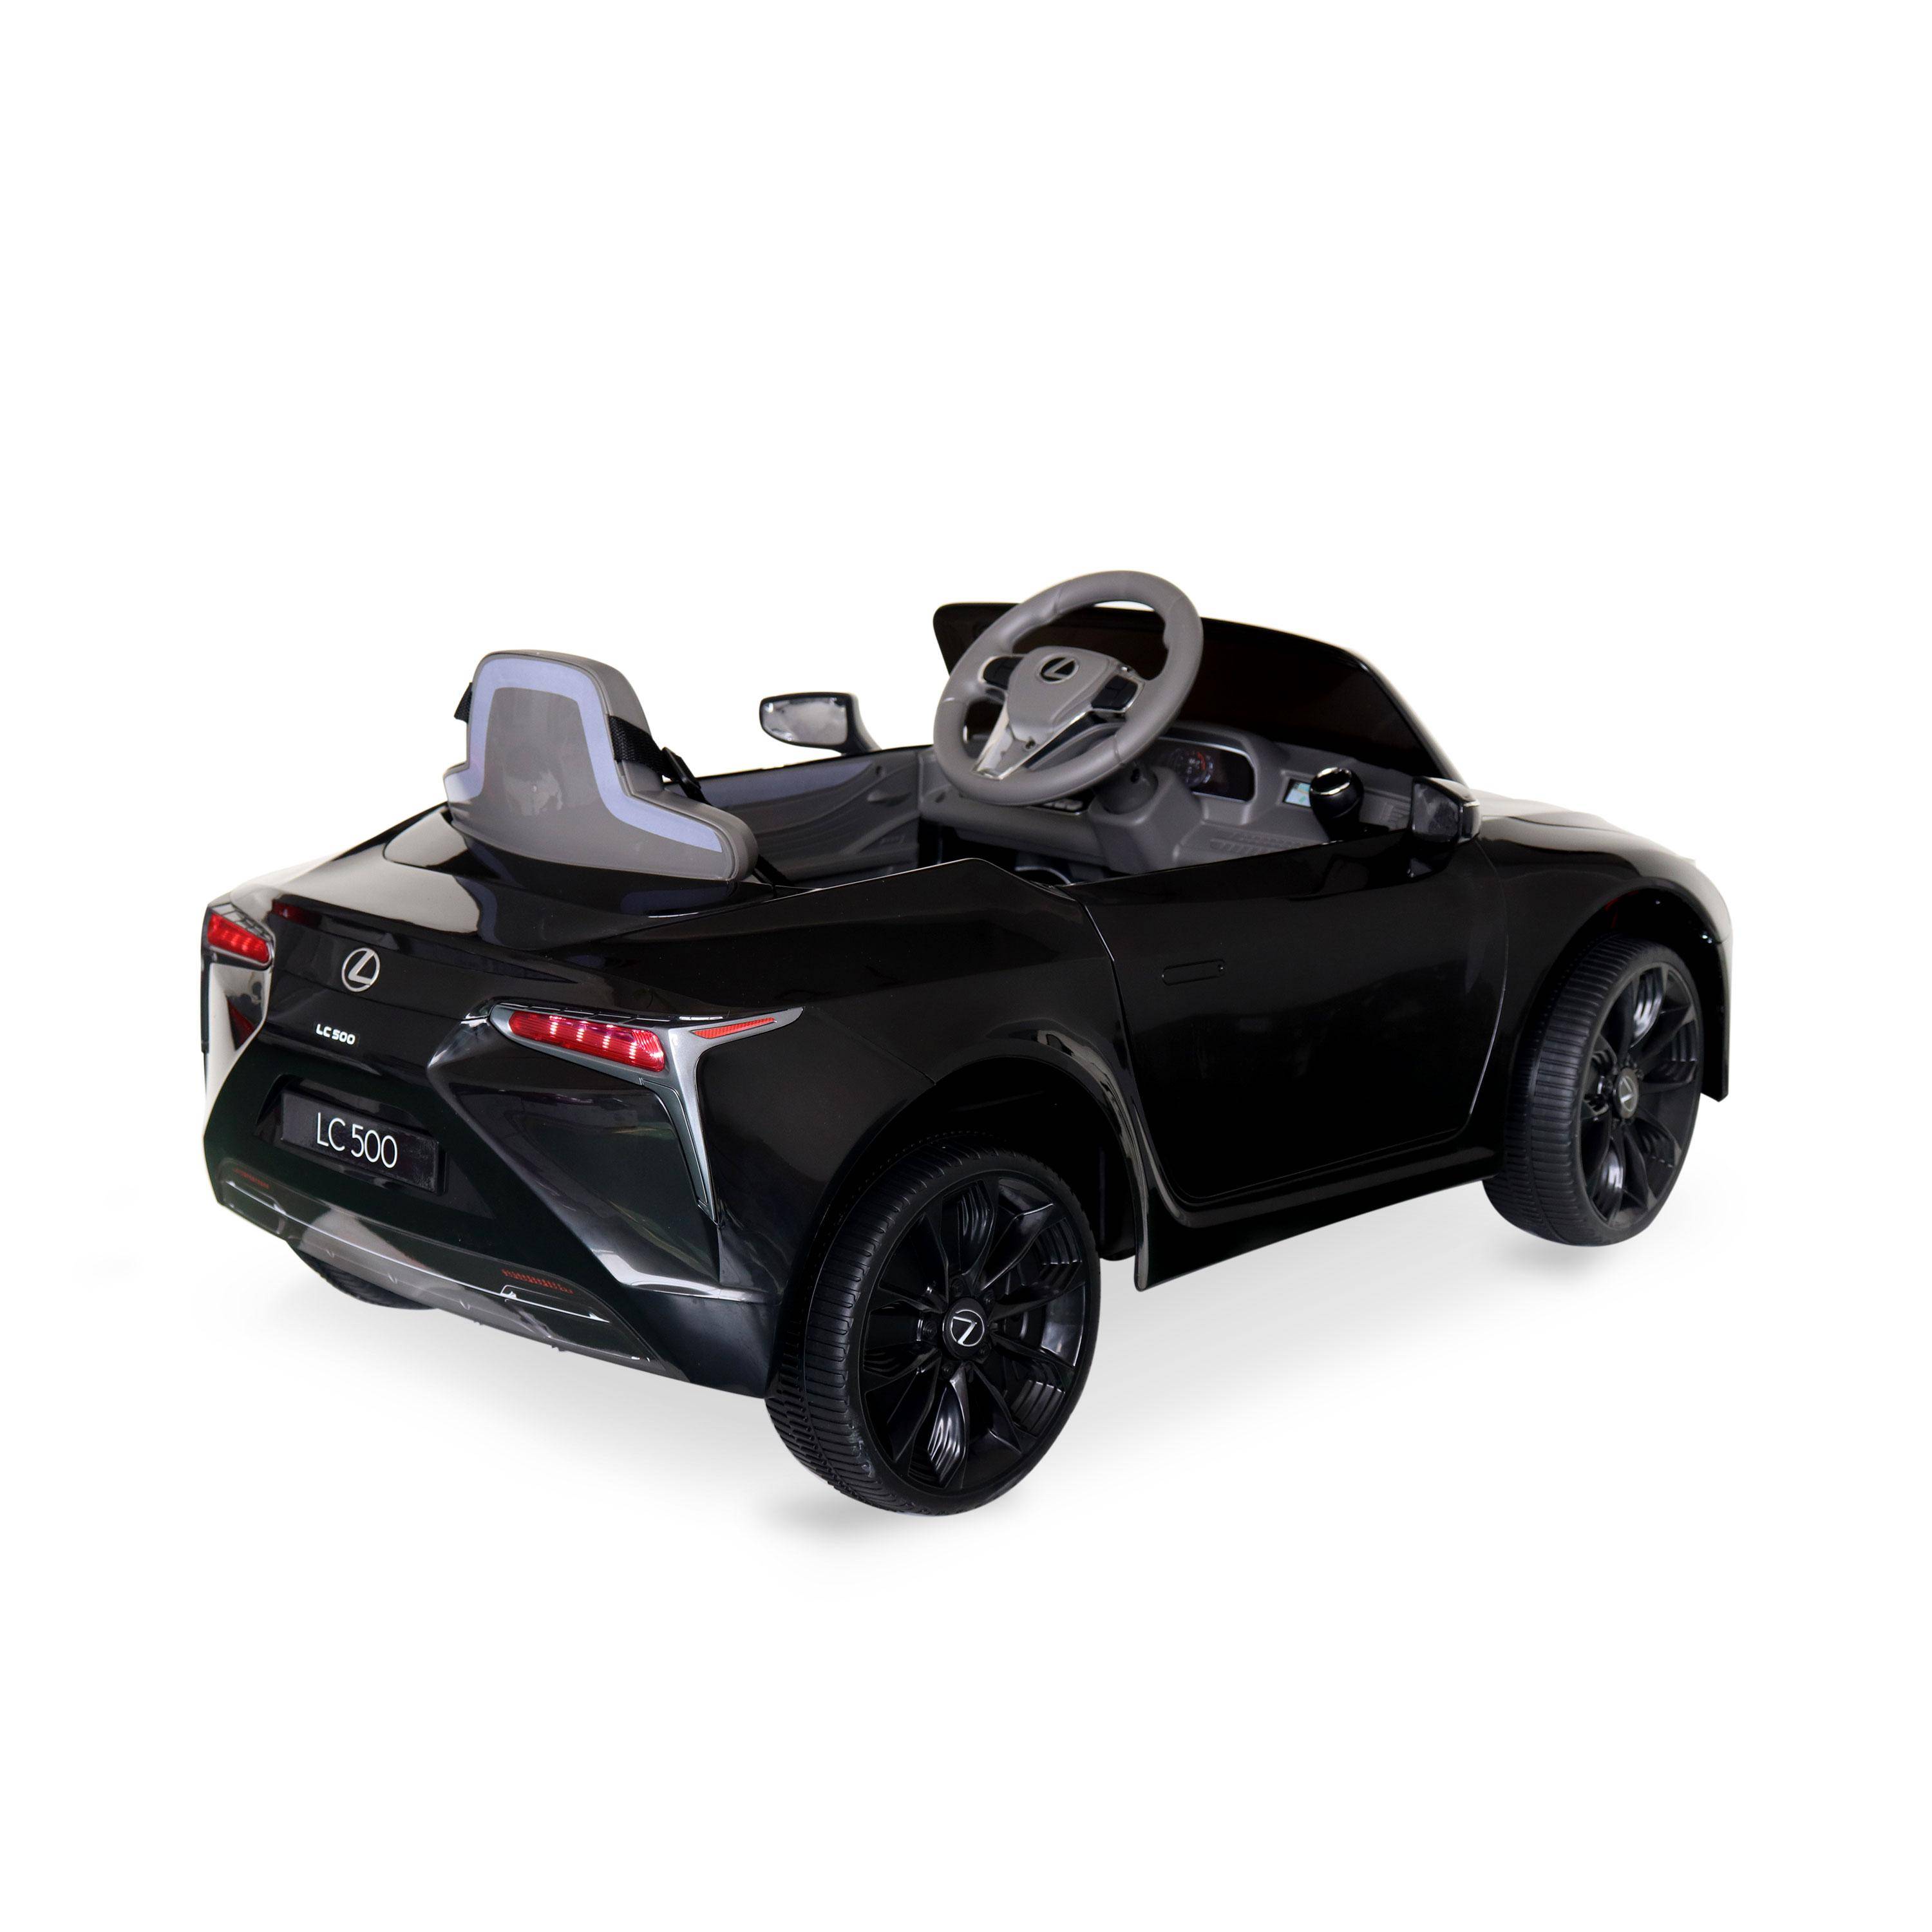 Children's electric car 12V, 1 seat, 4x4 with car radio and remote control - Lexus LC500 - Black,sweeek,Photo3